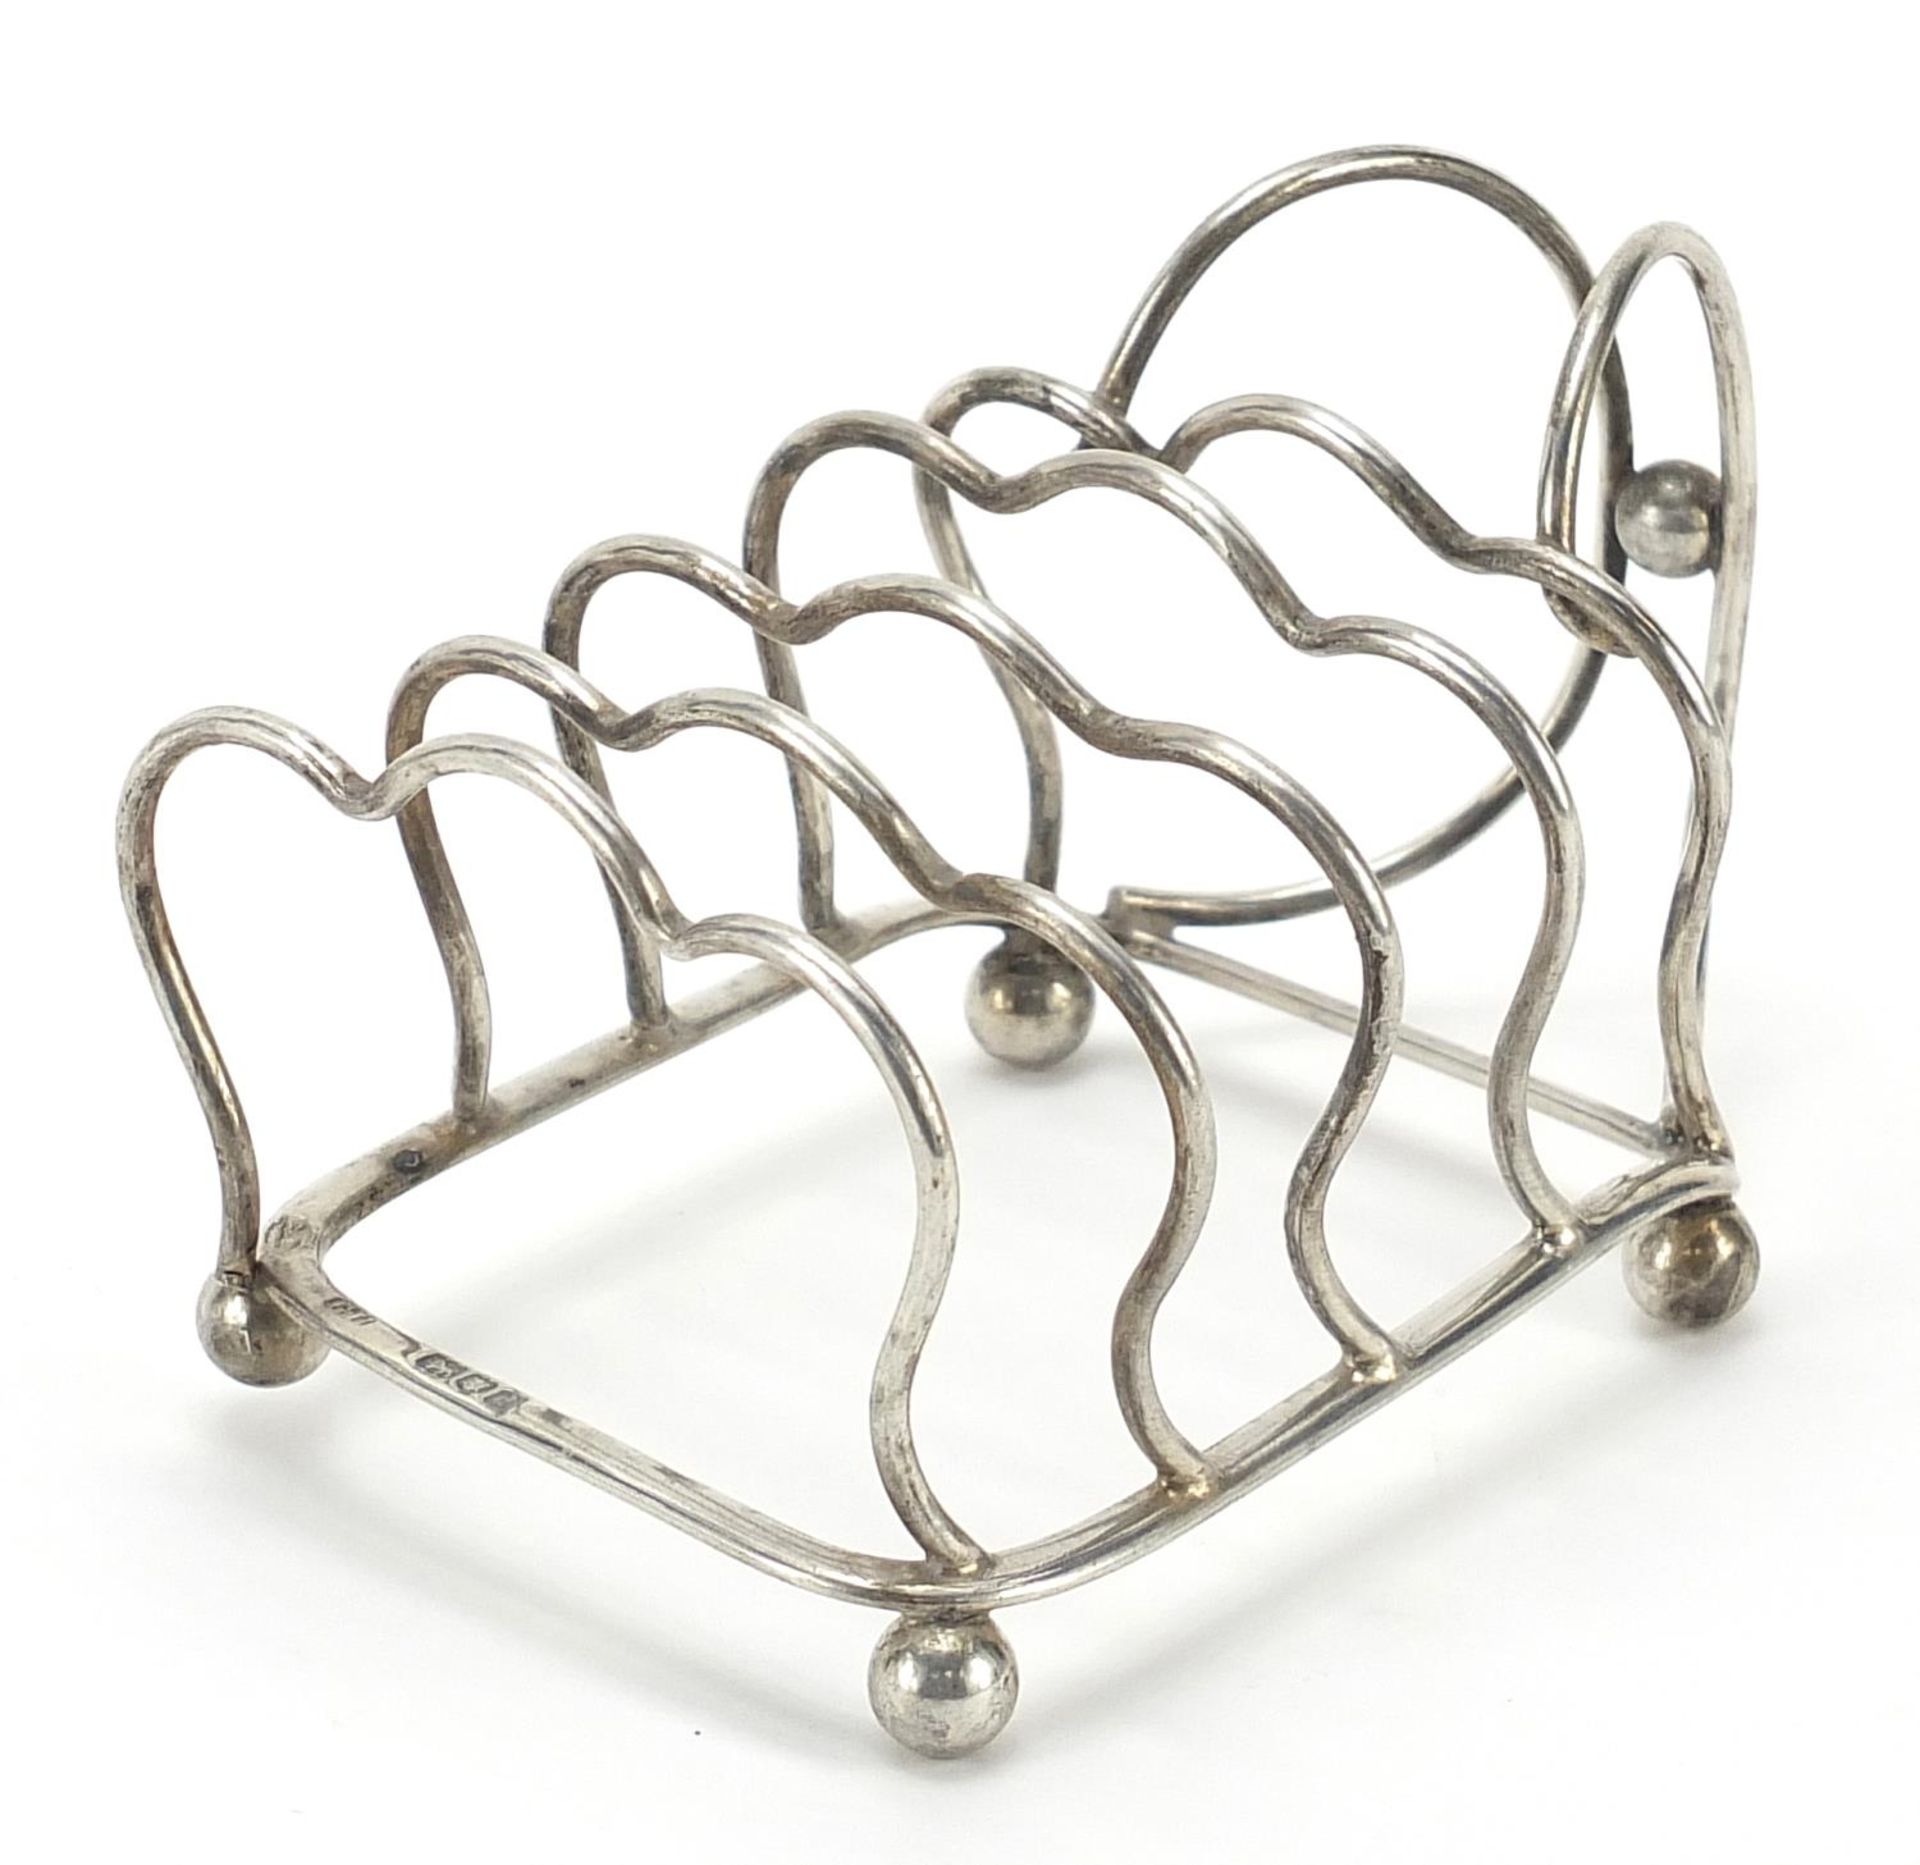 George Unite & Sons, Edward VII silver four slice toast rack with ball feet, London 1904, 12cm in